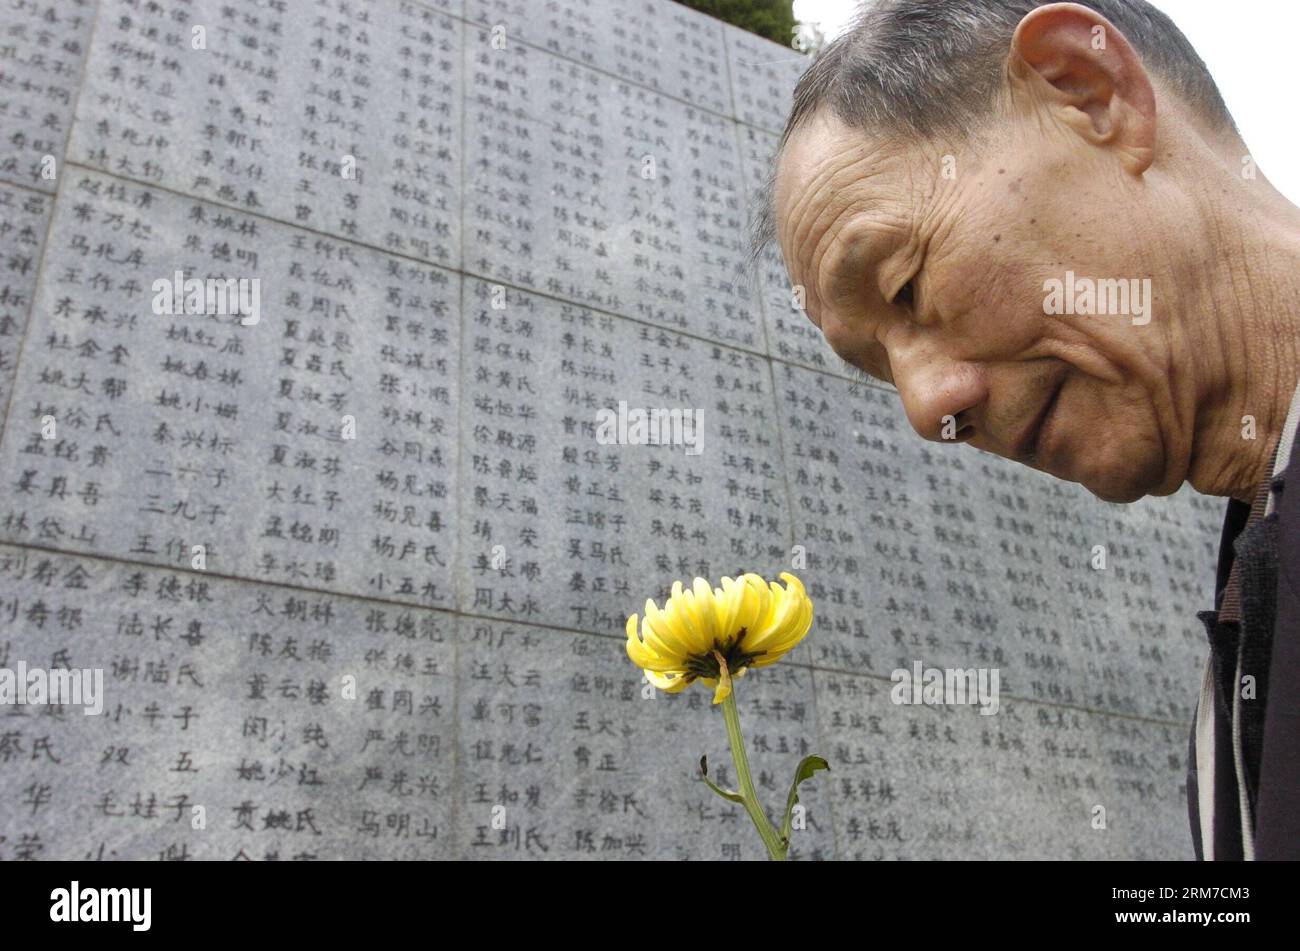 (140225) -- BEIJING, Feb. 25, 2014 (Xinhua) -- She Ziqing, a 74-year-old survival of the Nanjing Massacre, presents a flower to his mother who was killed in the Nanjing Massacre in front of a monument at the Memorial Hall of the Victims in Nanjing, capital of east China s Jiangsu Province, April 5, 2006. Chinese lawmakers are mulling making December 13 a national memorial day to commemorate those killed by Japanese aggressors during the Nanjing Massacre. The draft decision will be discussed at the bi-monthly session of the Standing Committee of the National People s Congress (NPC) which runs f Stock Photo